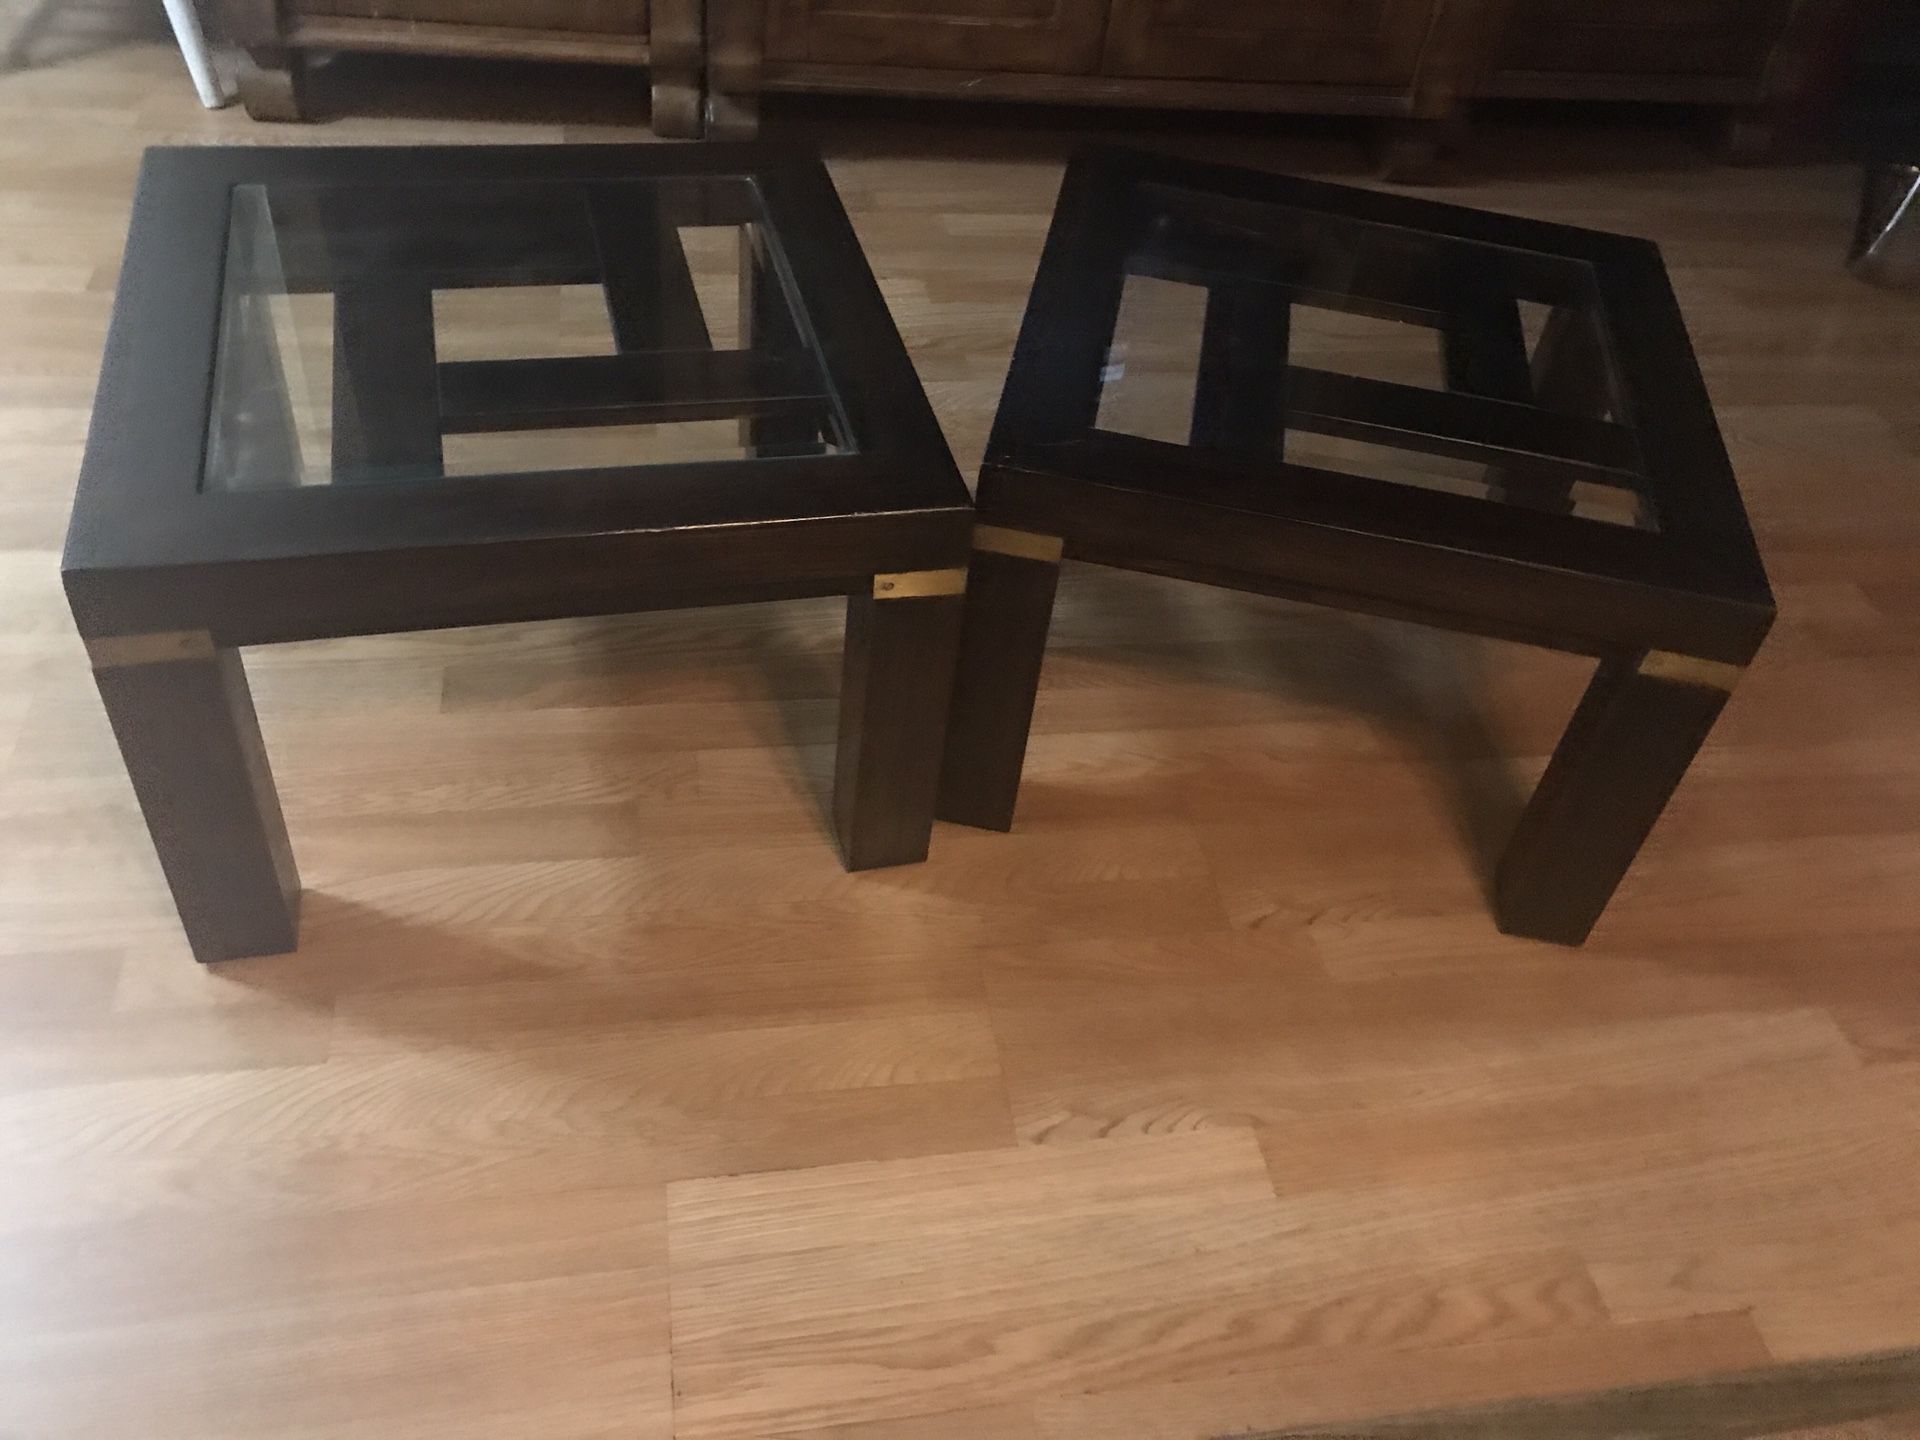 Two end tables.16 inches tall.24 inches wide,24 inches deep